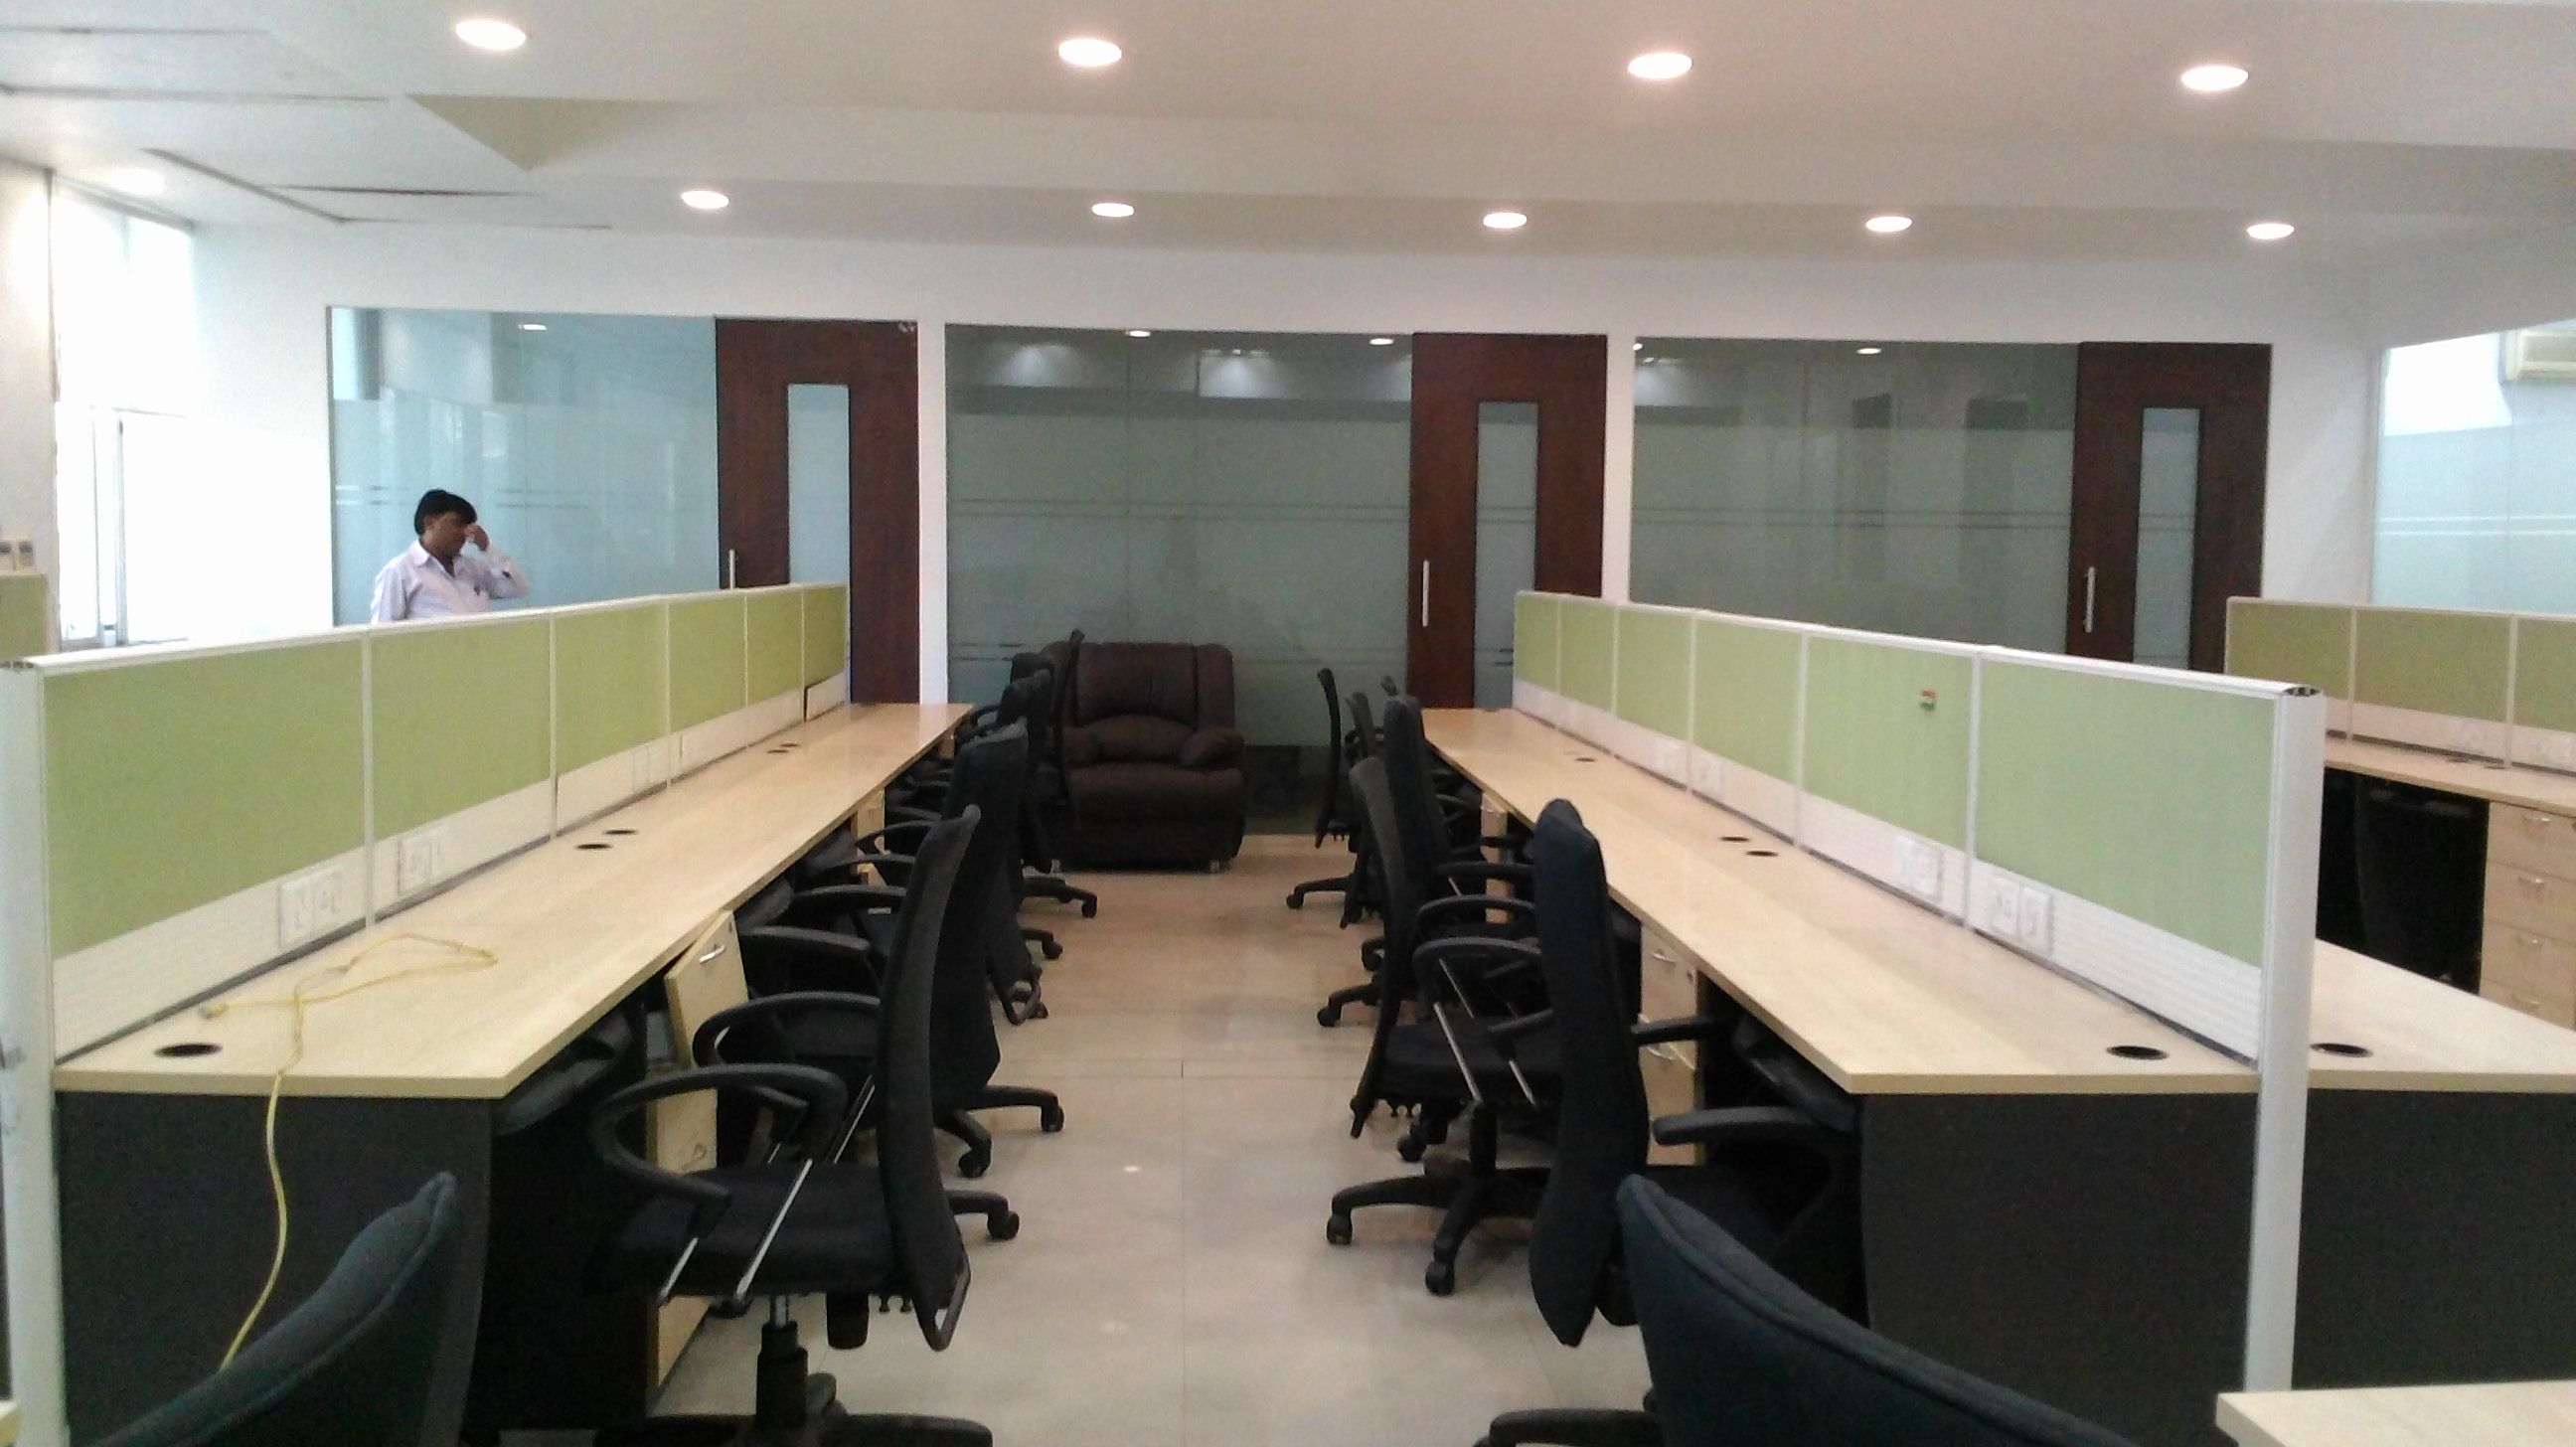 Commercial Office Space for Rent in Orion Business Park,Ghodbunder Road. Near Cinemax, Thane-West, Mumbai